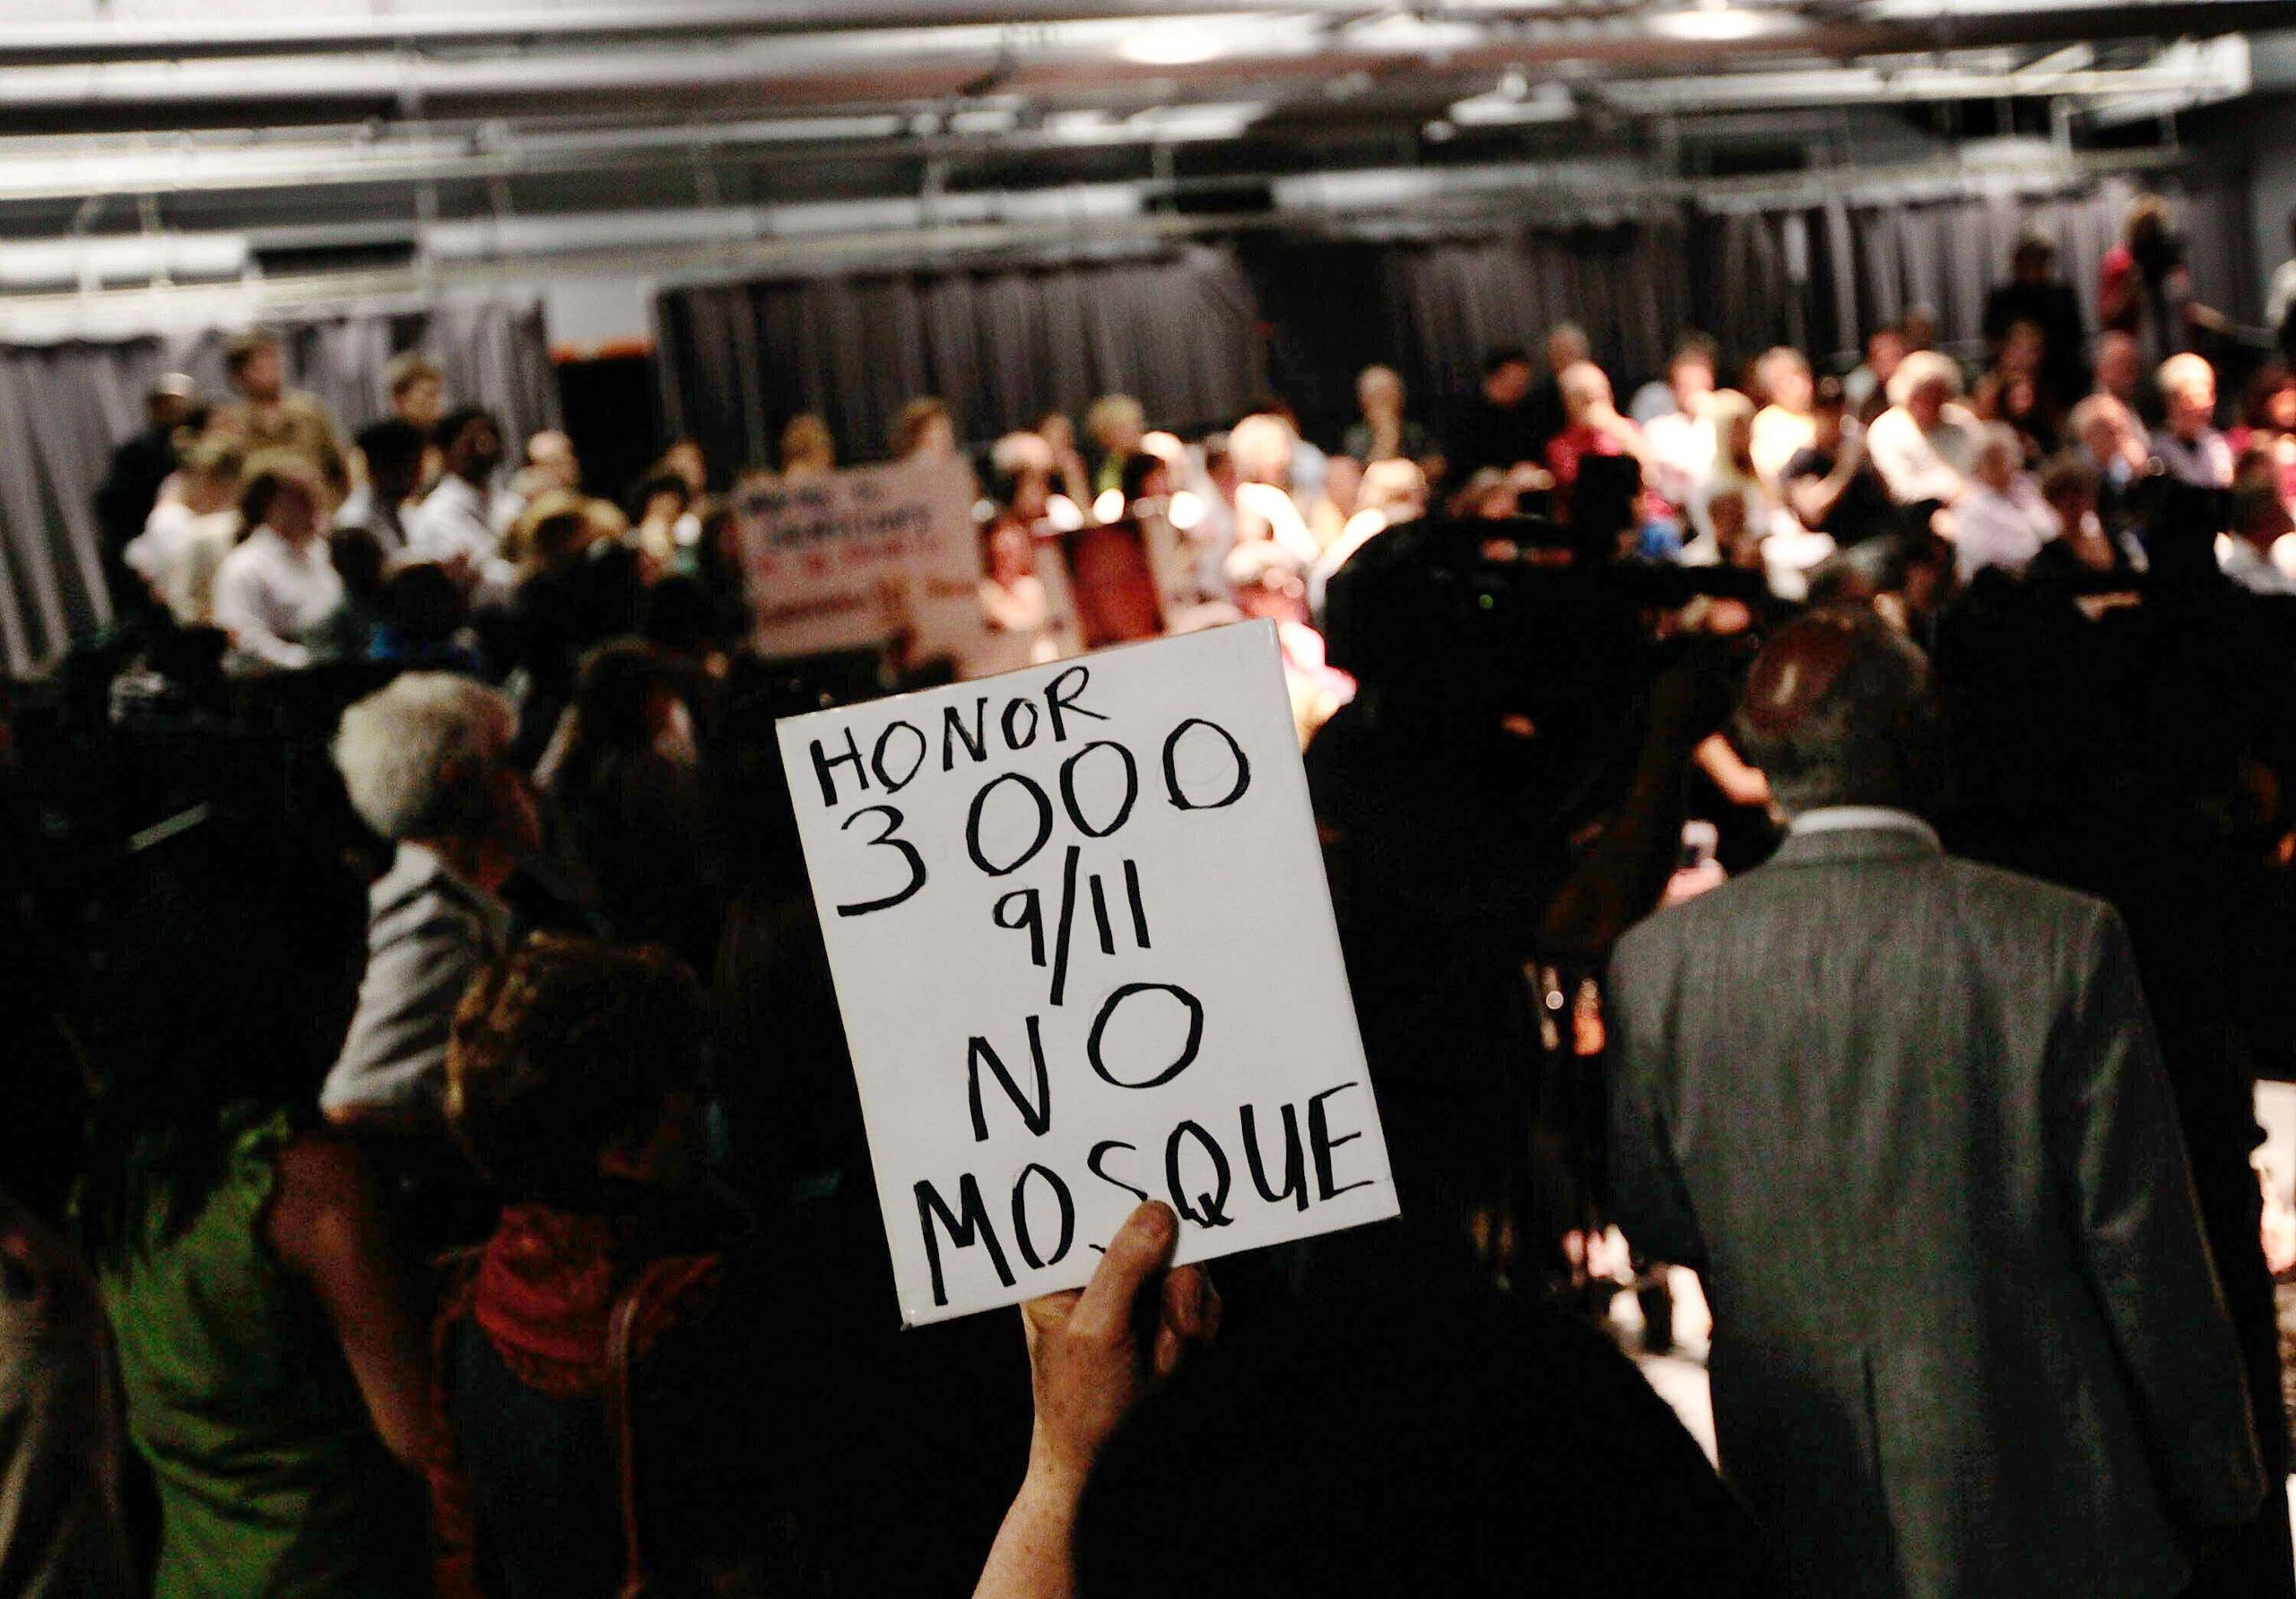 The heated scene at a community board meeting to debate the Cordoba House in Lower Manhattan on May 25, 2010.&nbsp;